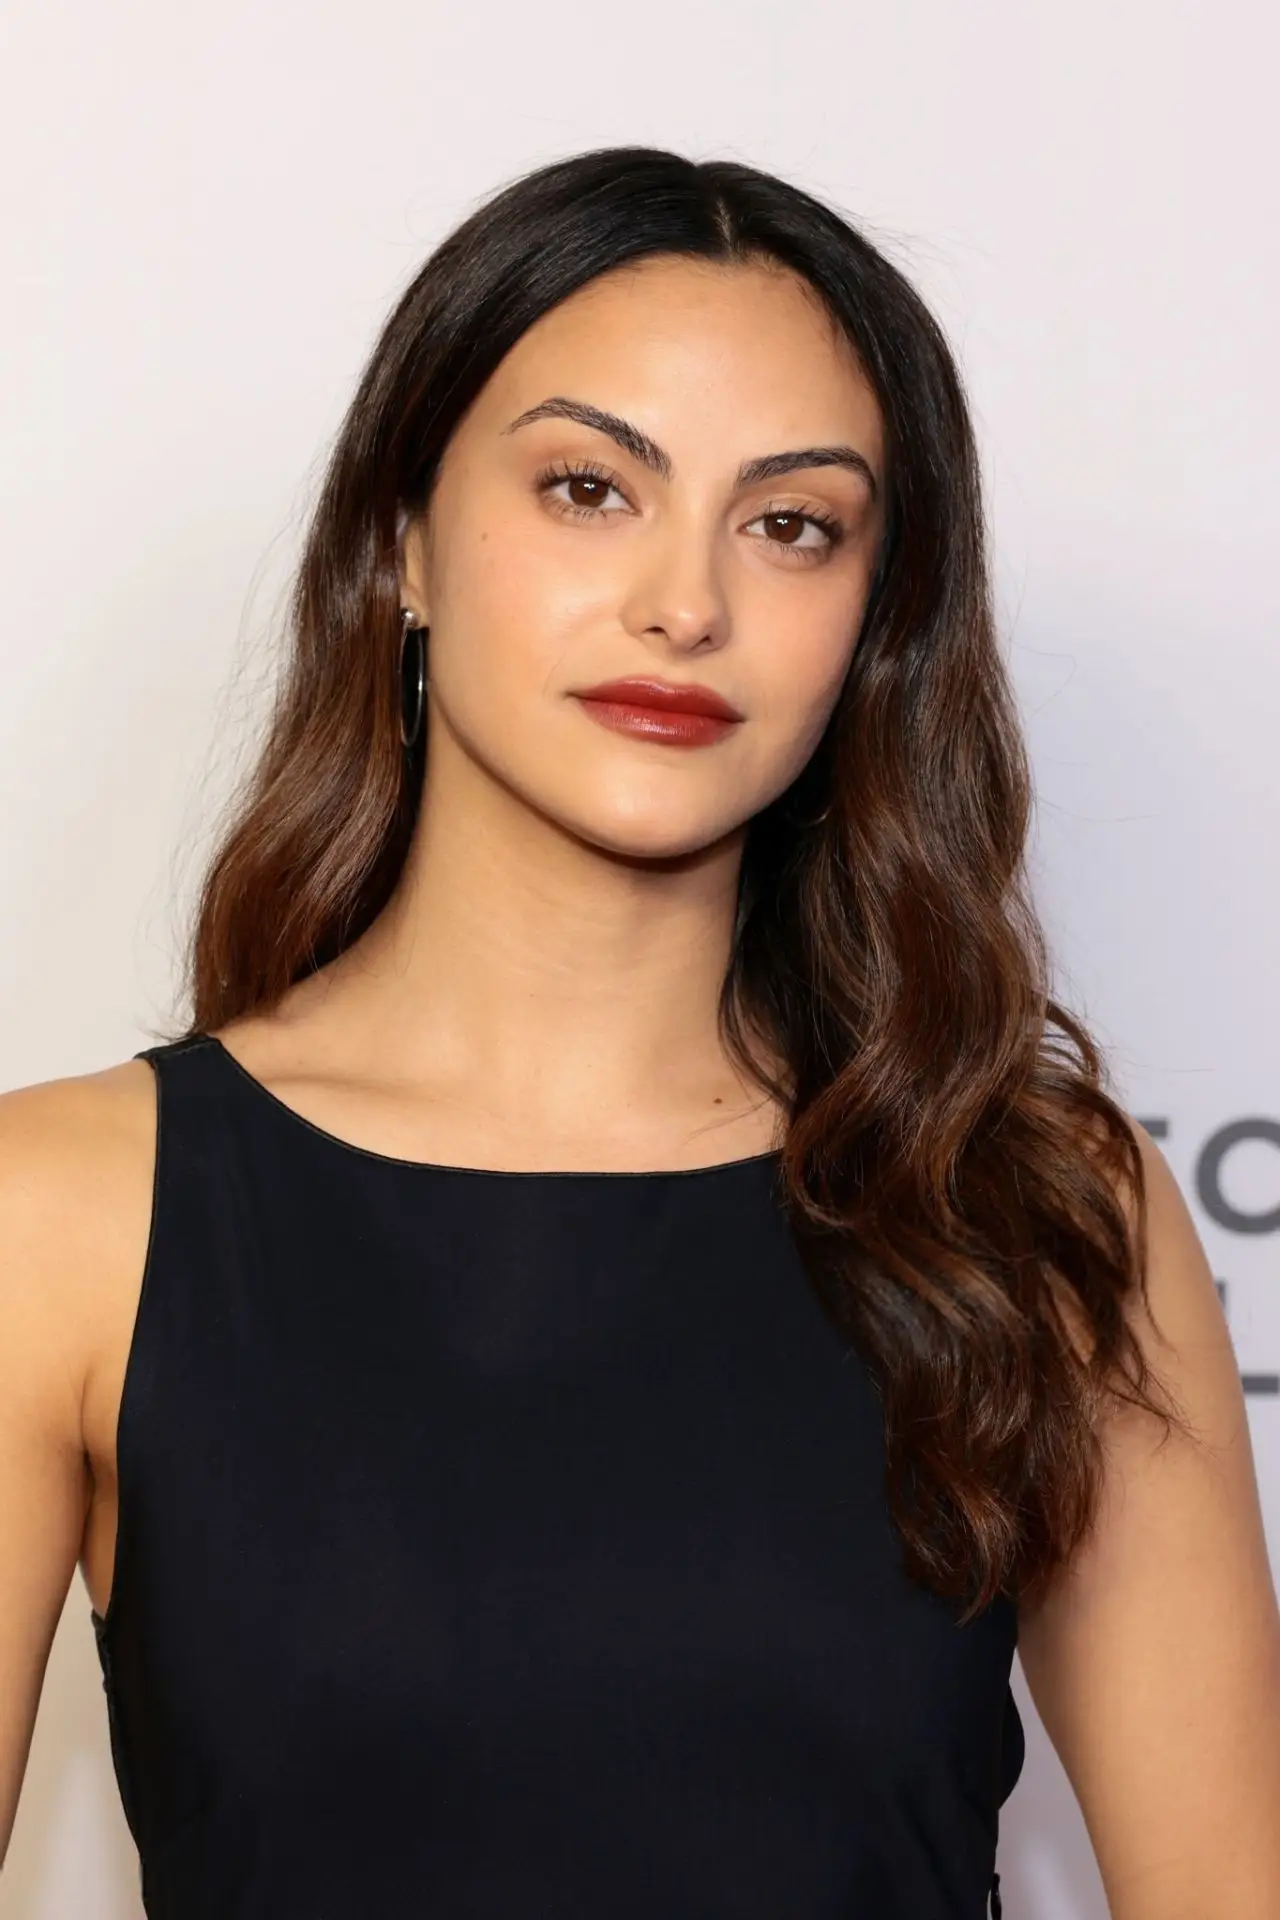 CAMILA MENDES AT THE SUMMER PREMIERE AT THE TRIBECA FESTIVAL IN NEW YORK07